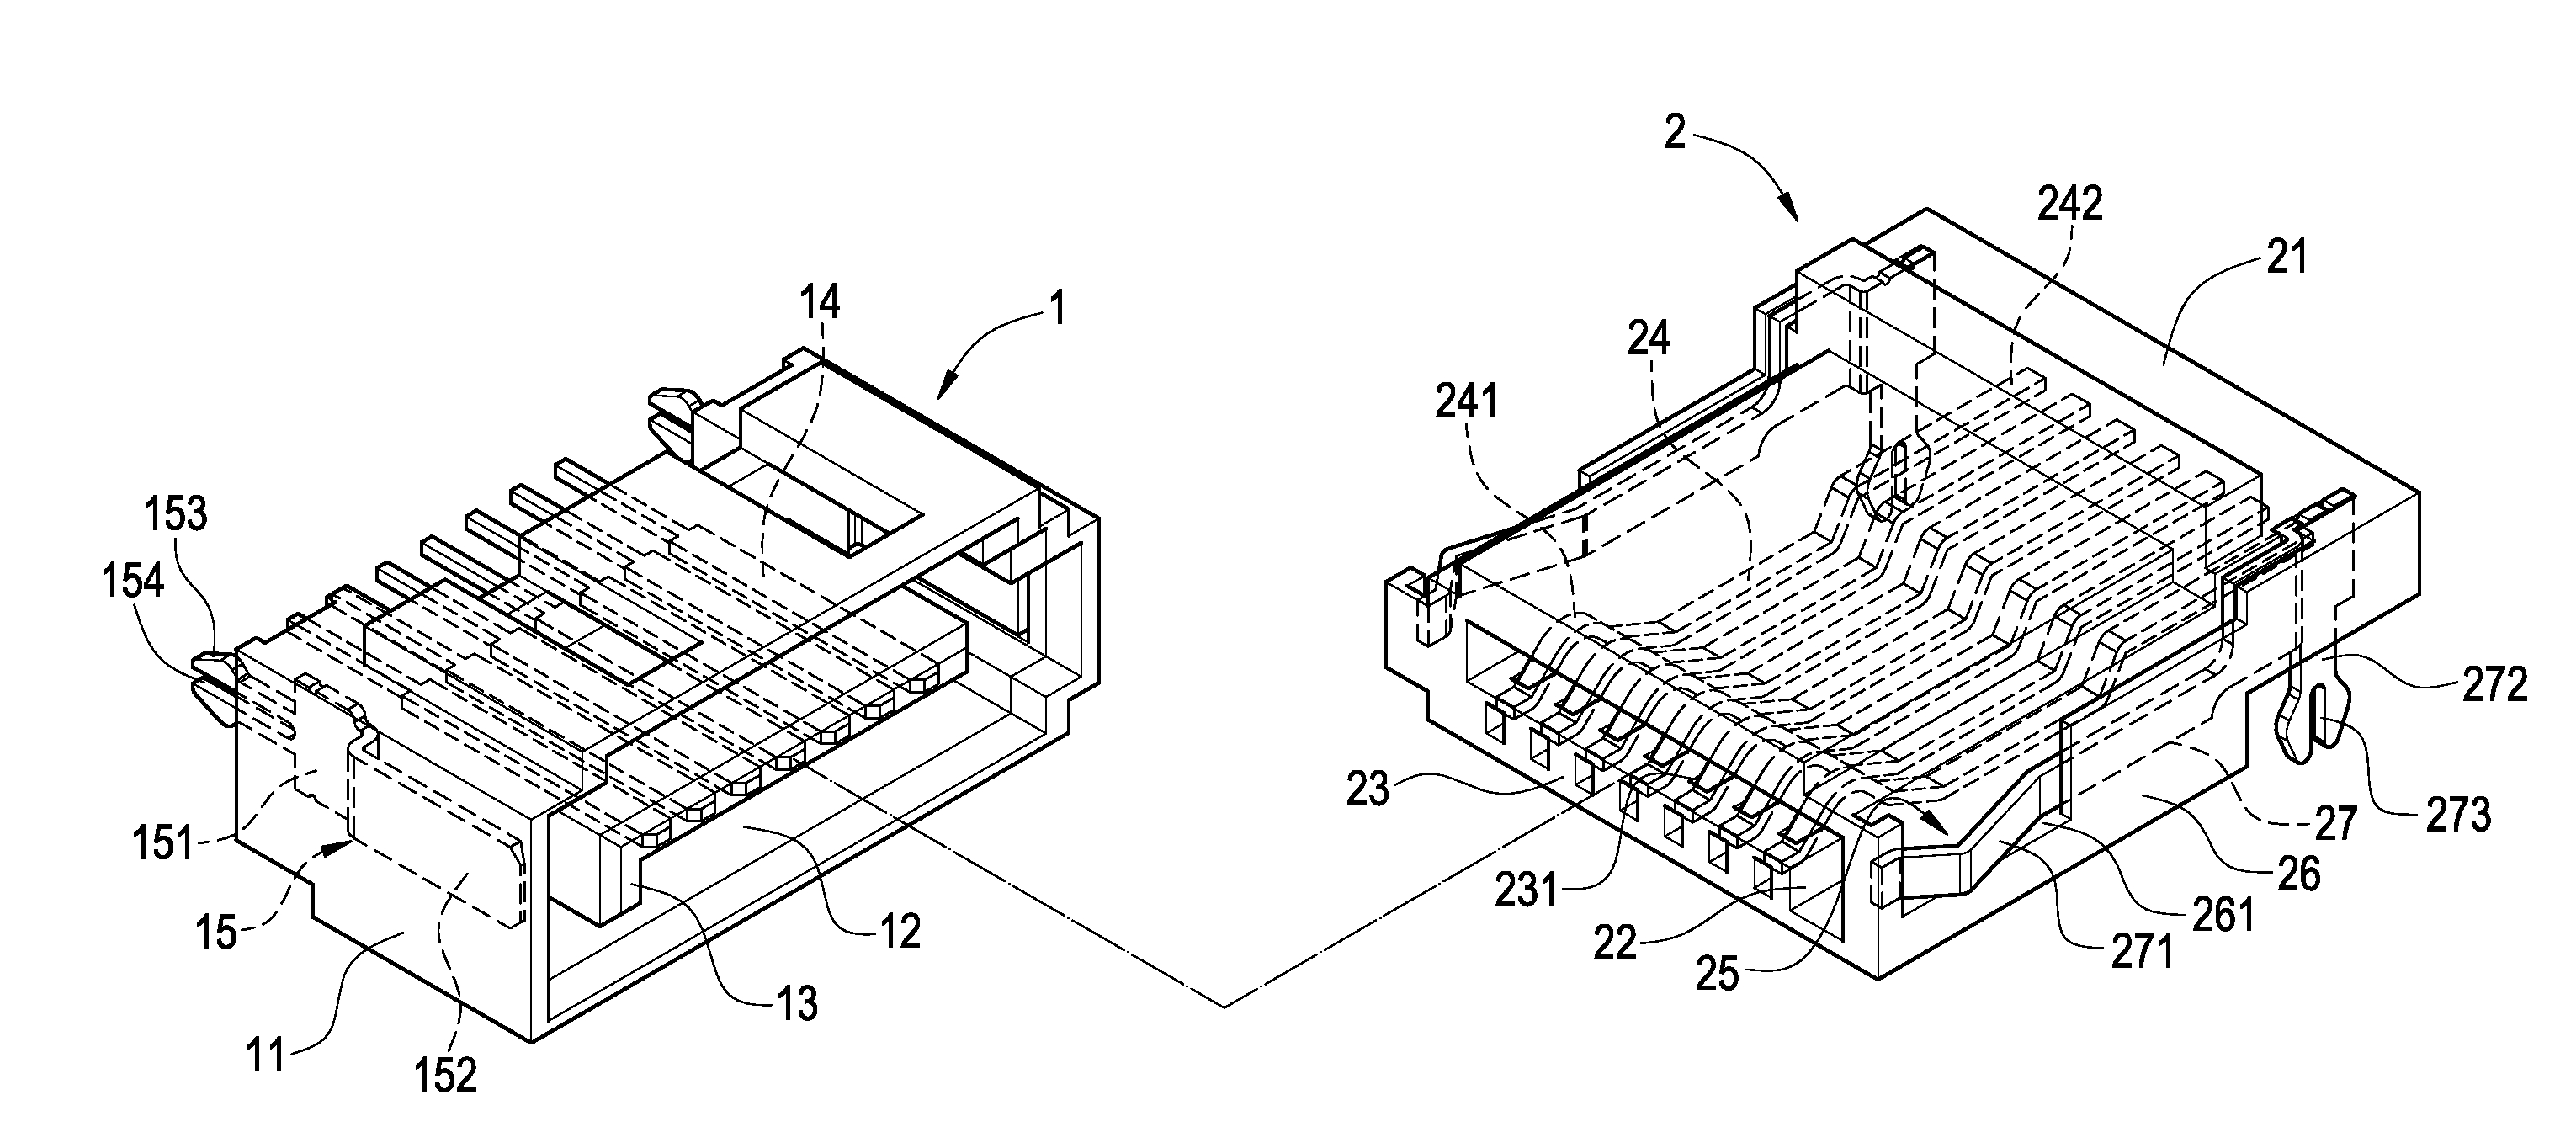 SATA connector capable of transmitting electric power